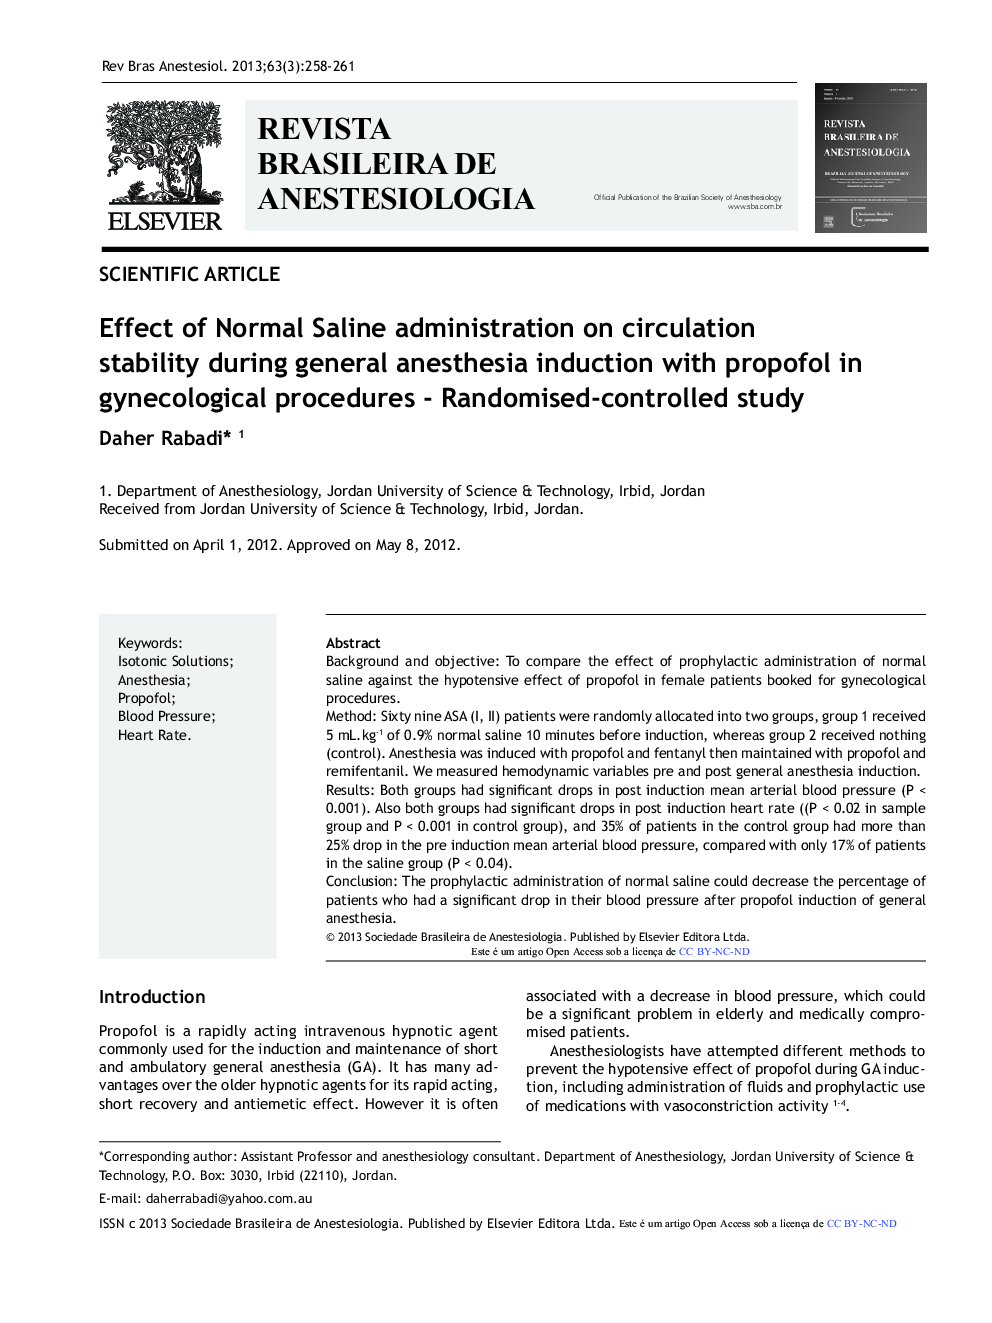 Effect of Normal Saline administration on circulation stability during general anesthesia induction with propofol in gynecological procedures - Randomised-controlled study 